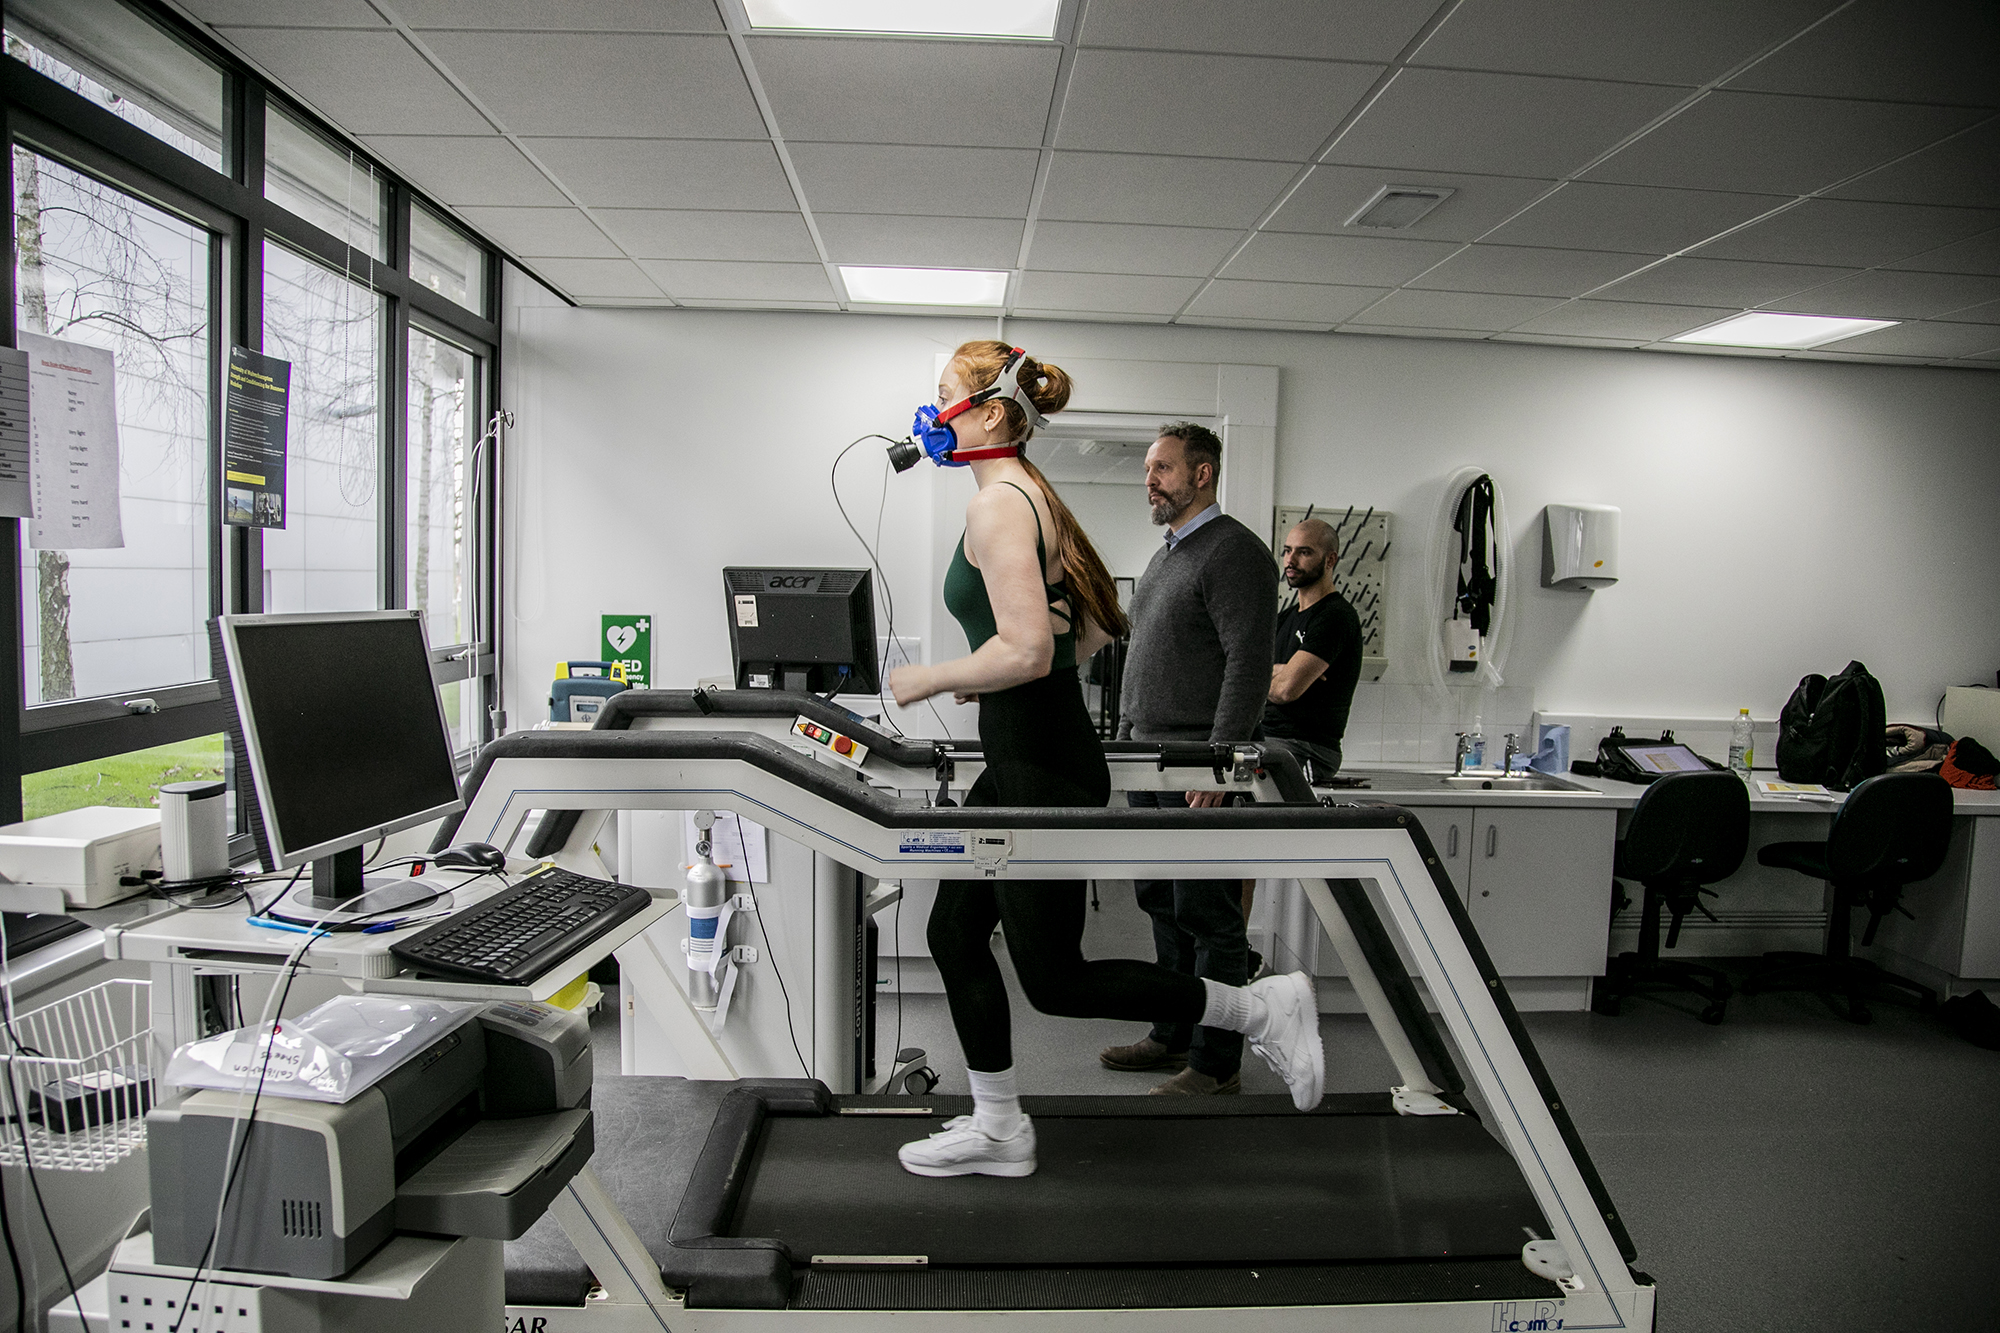 White female dancer with long red hair running on a treadmill wearing face-mask to measure cardiovascular fitness. White male physiologist looking over to observe stats on the machine. In a white laboratory setting with a window in the background